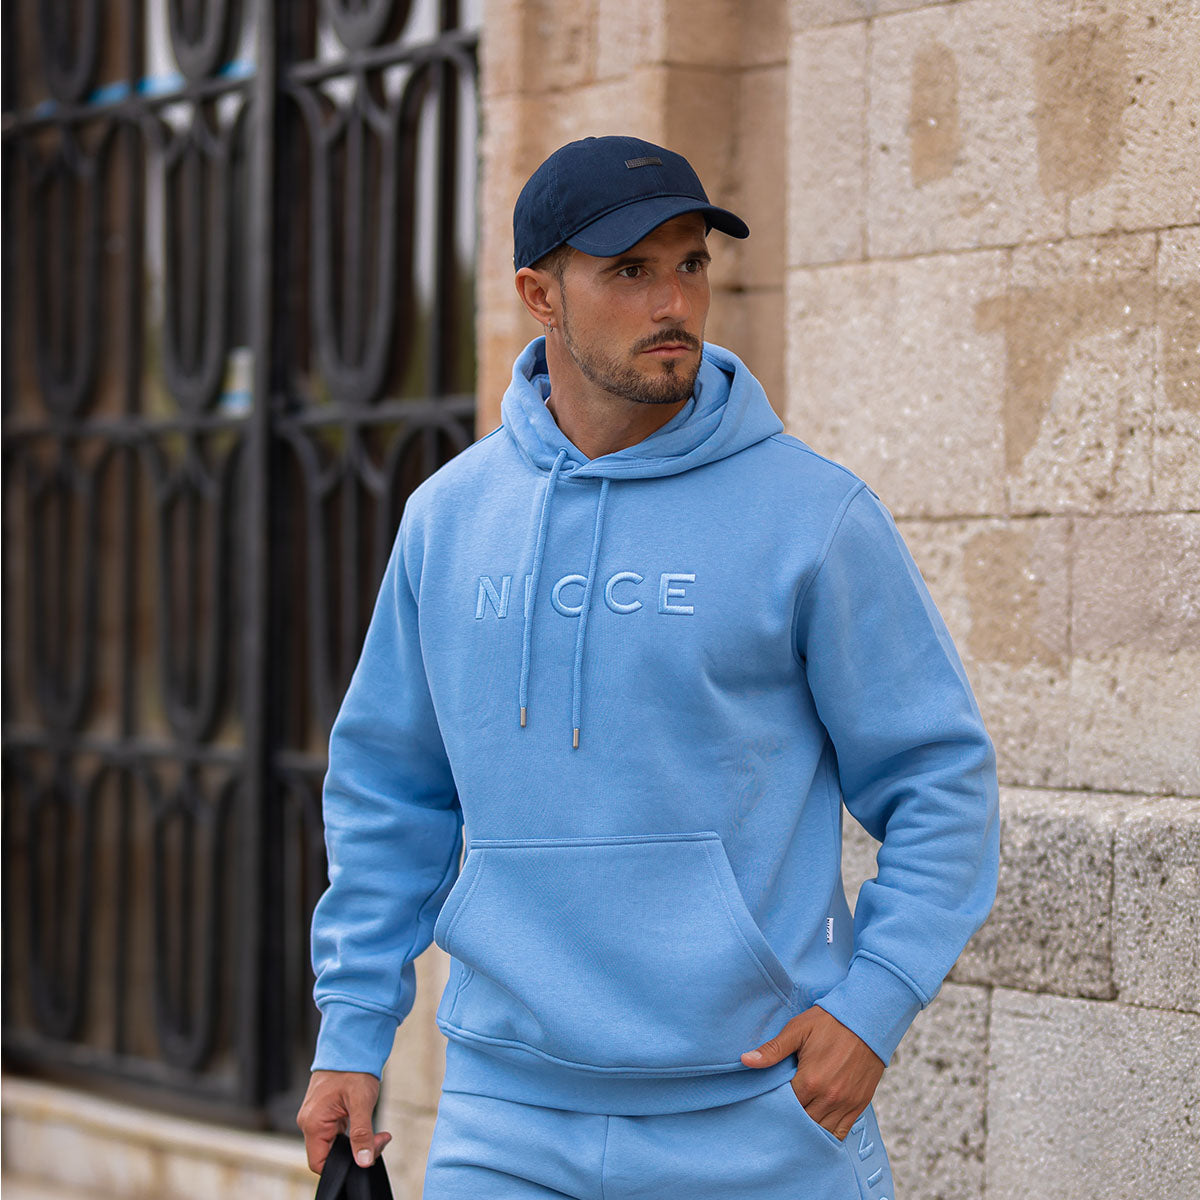 Discover the latest Nicce streetwear collection. Trendy, bold, and designed for the urban lifestyle.